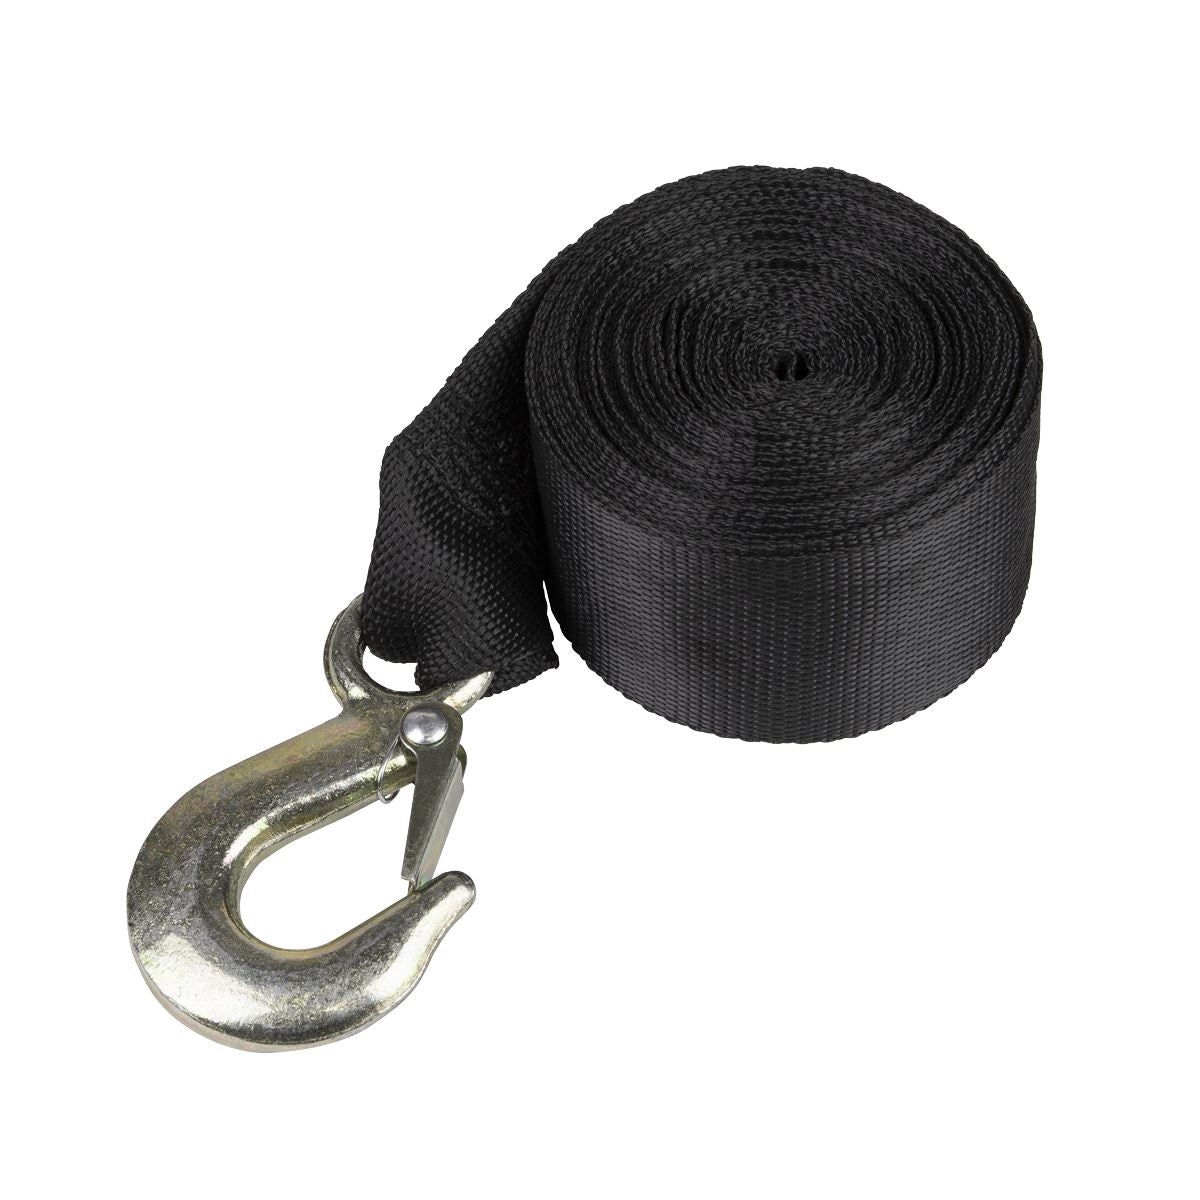 Sealey Trailer Winch Strap 50mm x 7m 810kg Breaking Strength with Forged Hook